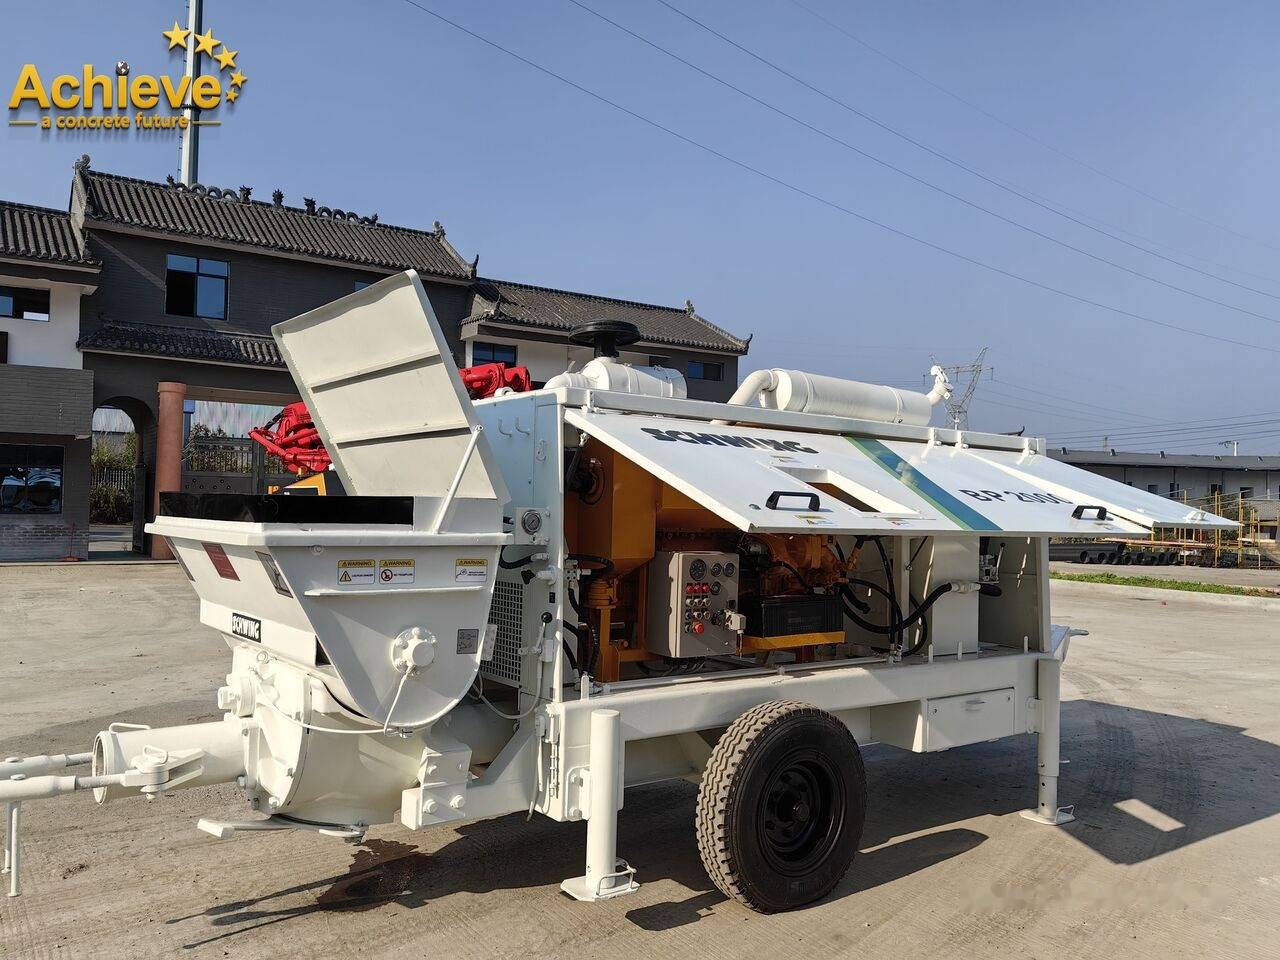 New Stationary concrete pump Schwing 【ACHIEVE】TOP CONDITION!!! Schwing Concrete Pump With Brand New H: picture 7